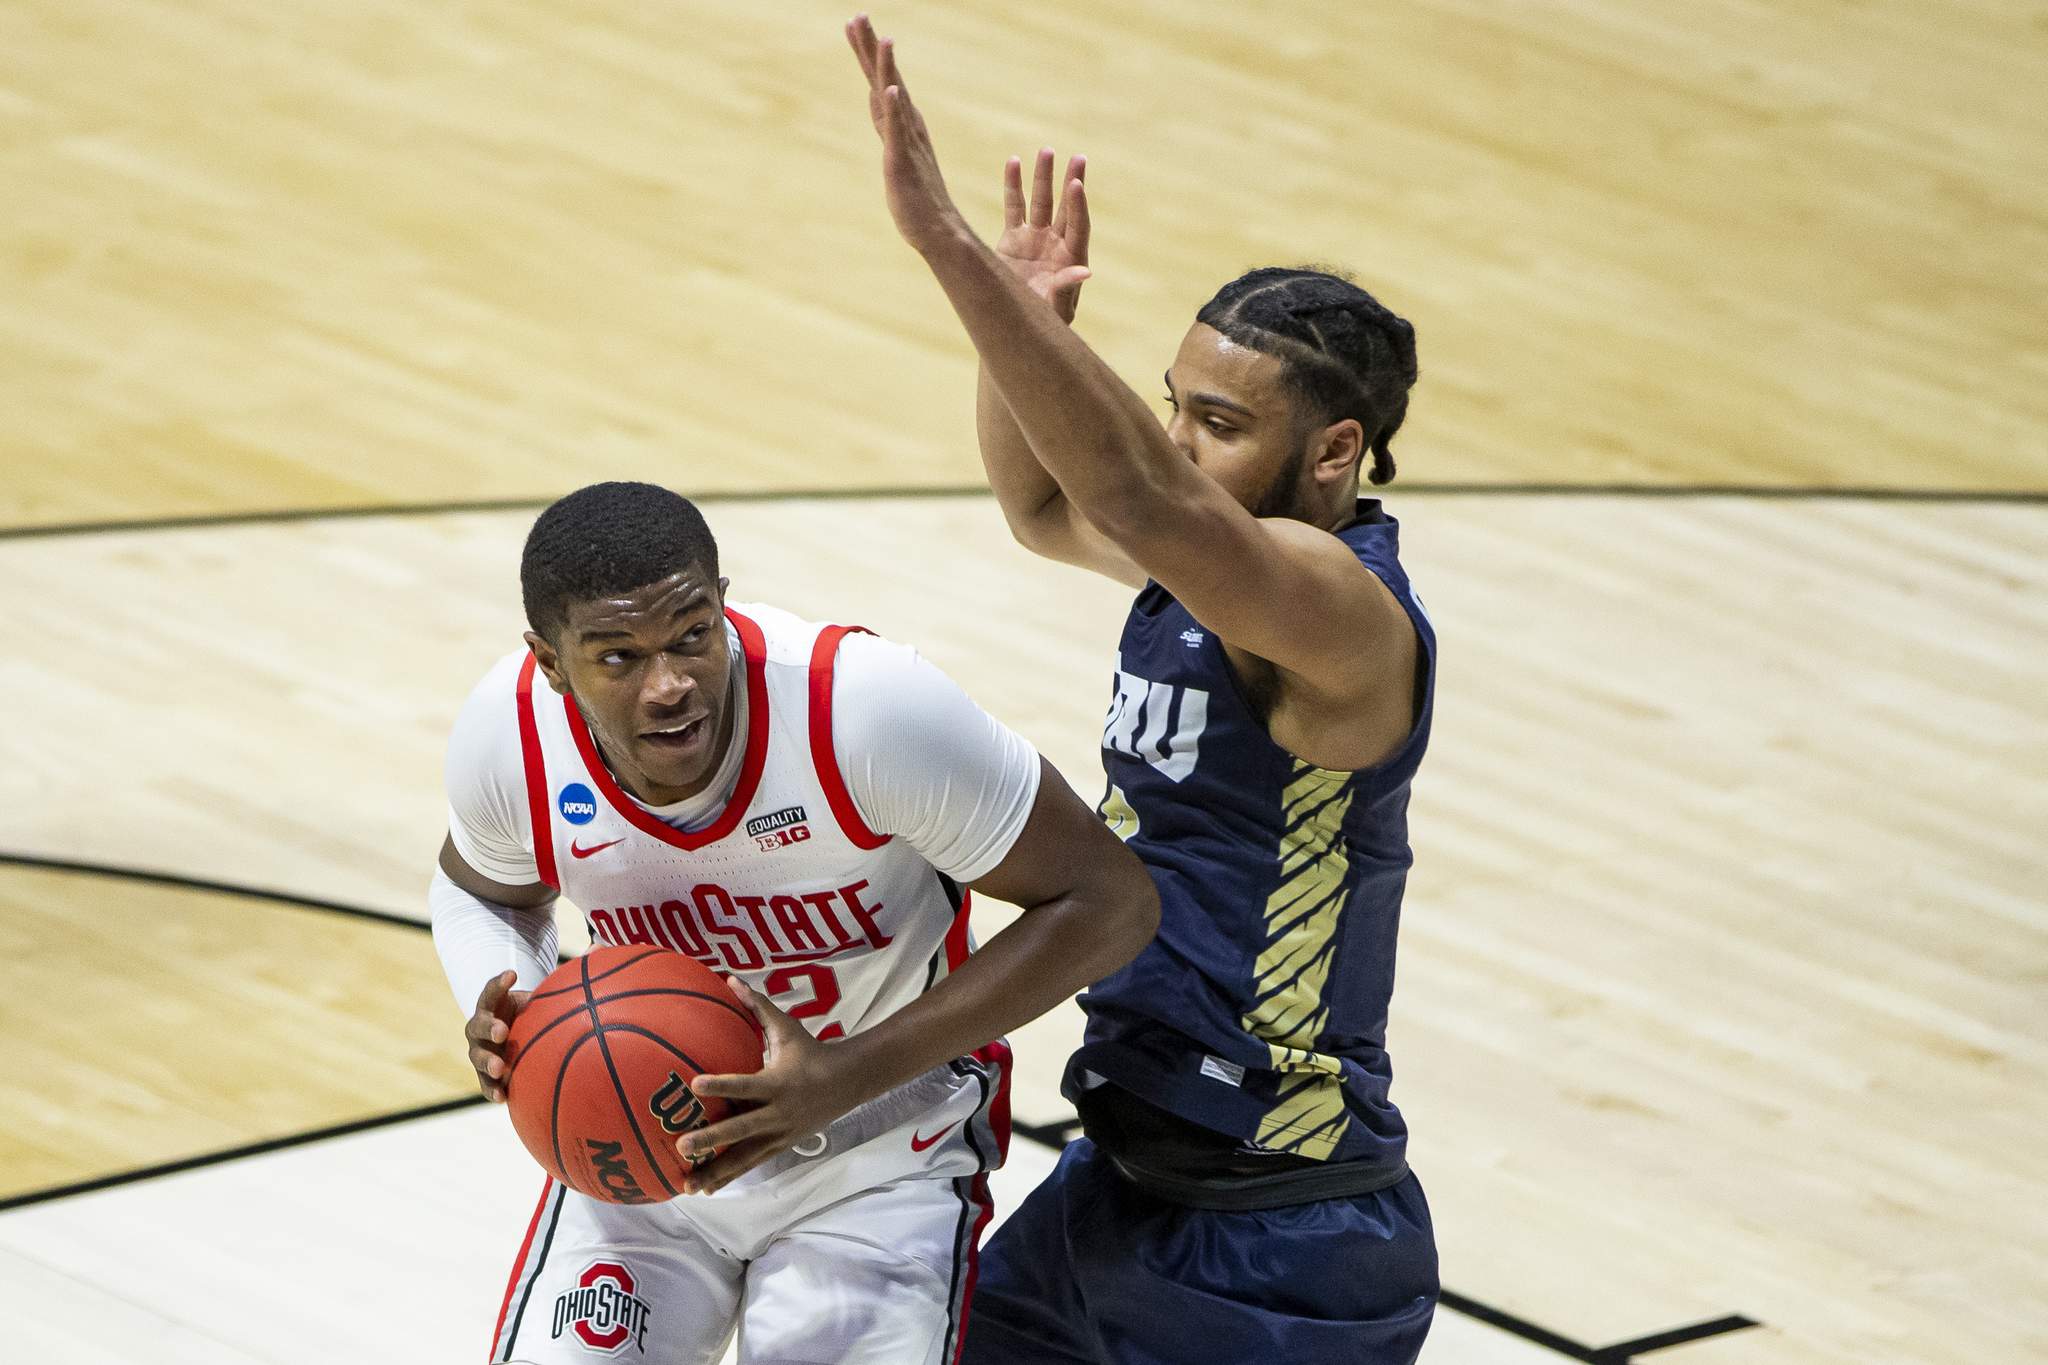 Police contacted after Ohio State's Liddell receives threats